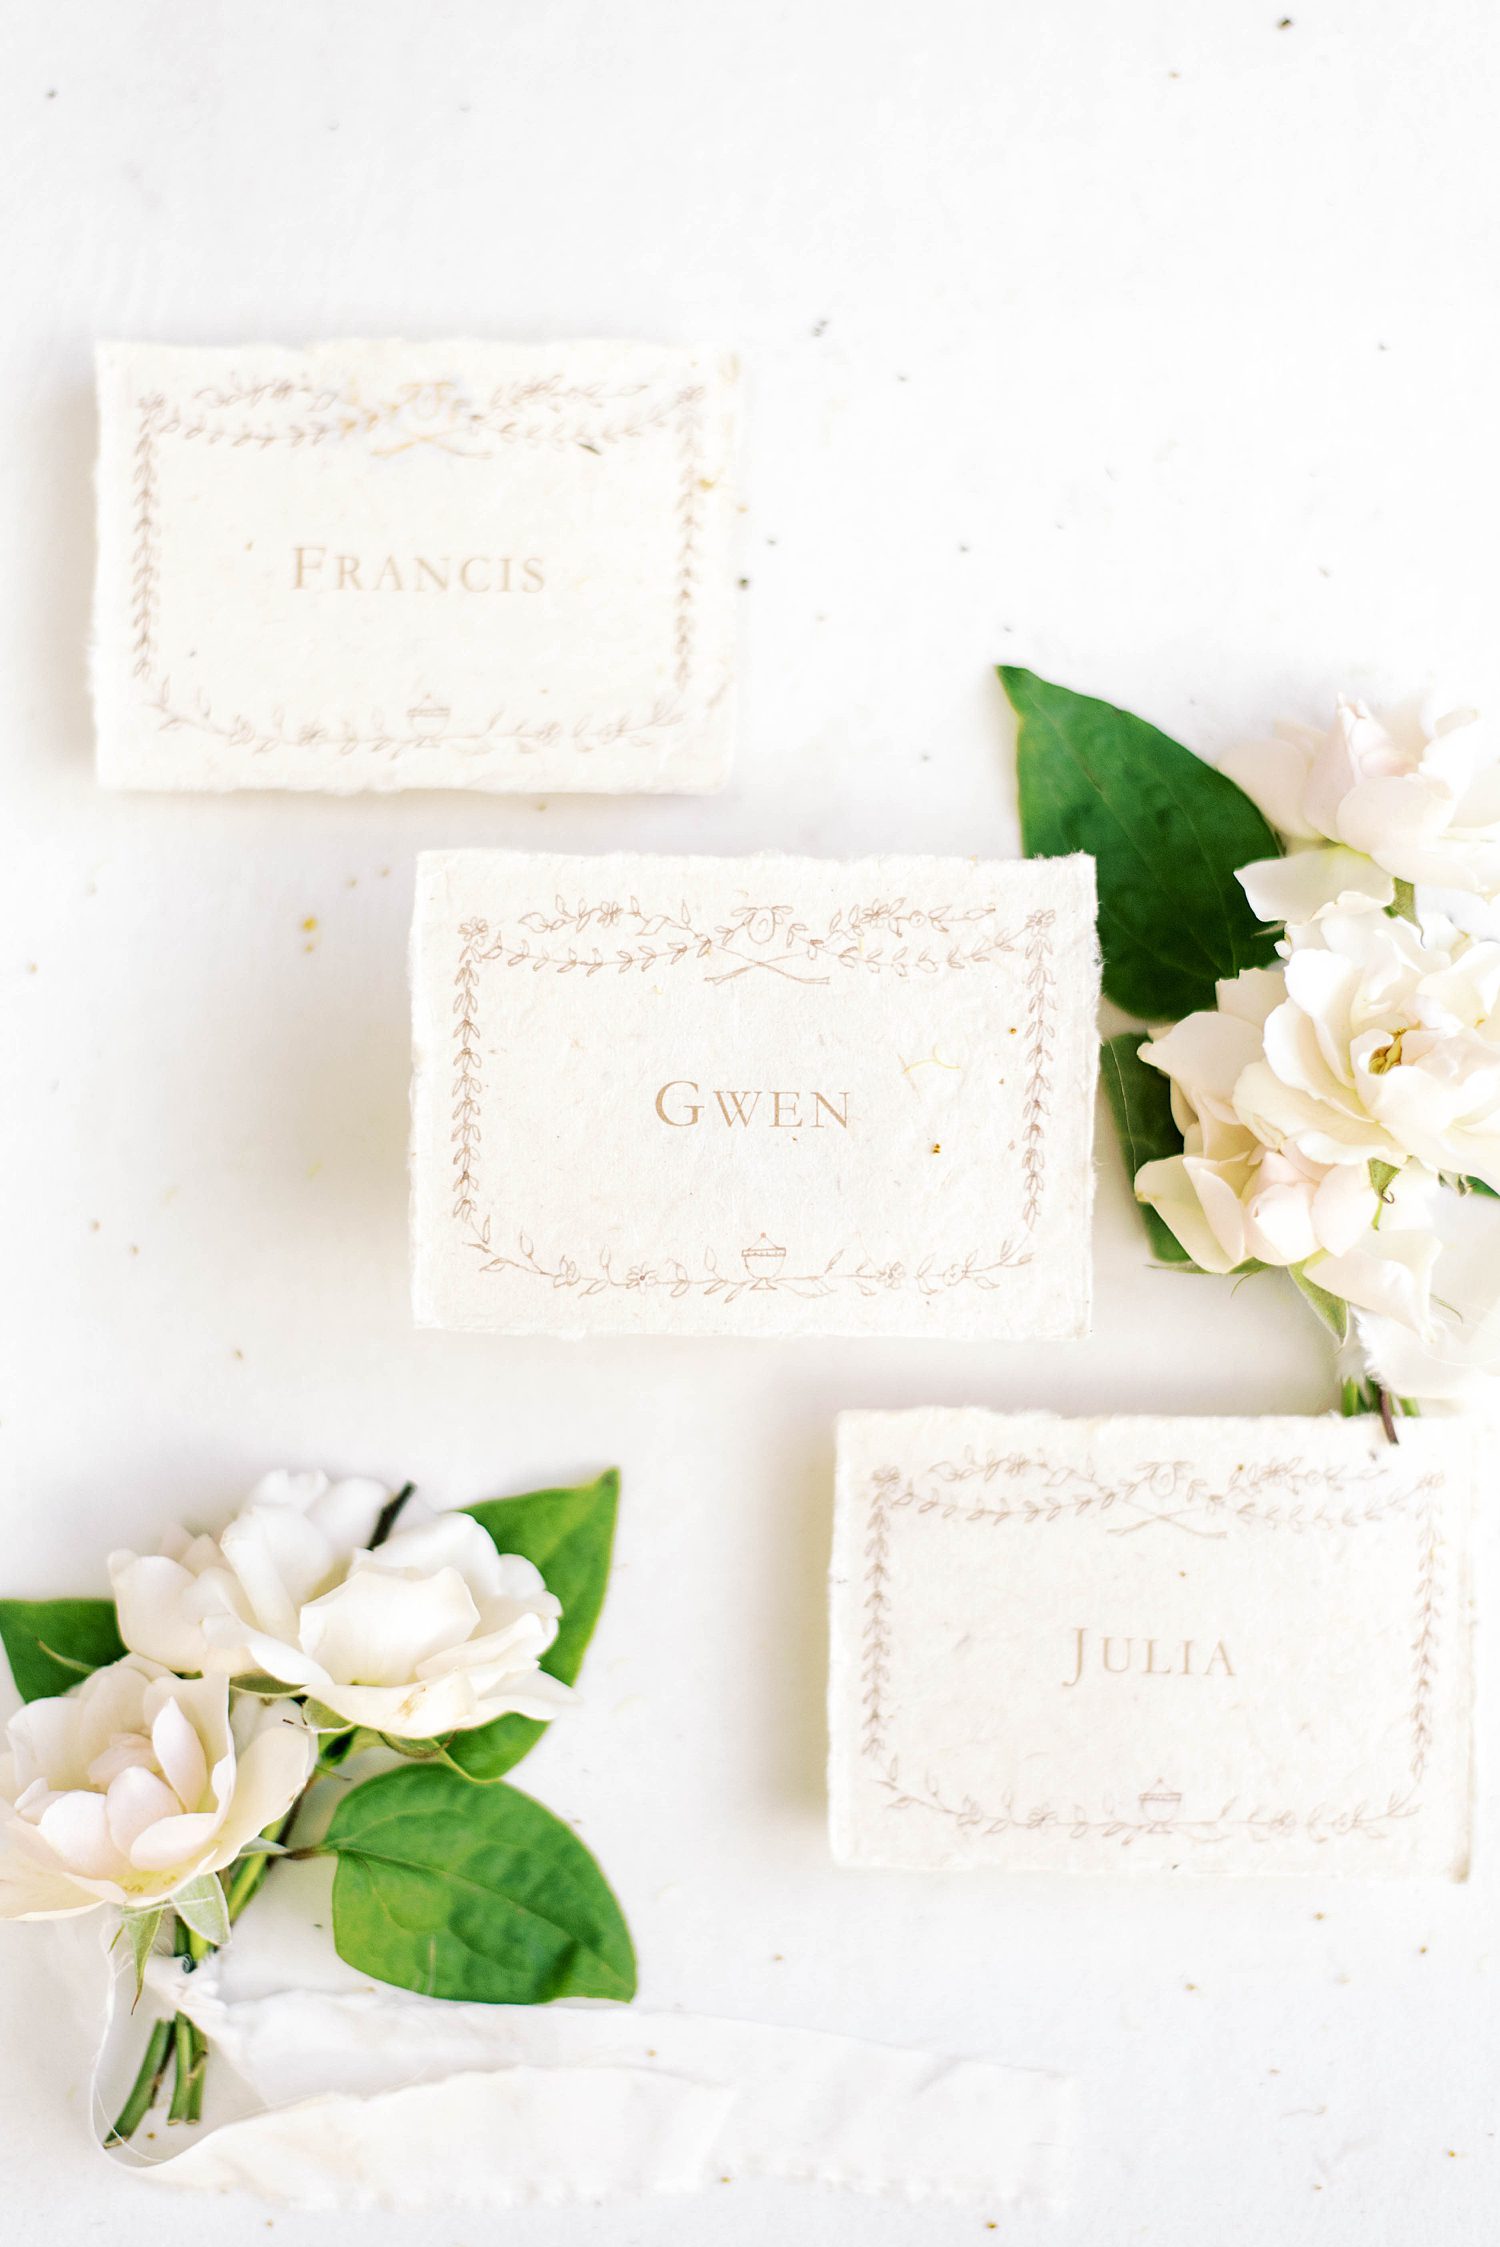 seating cards for European inspired wedding reception